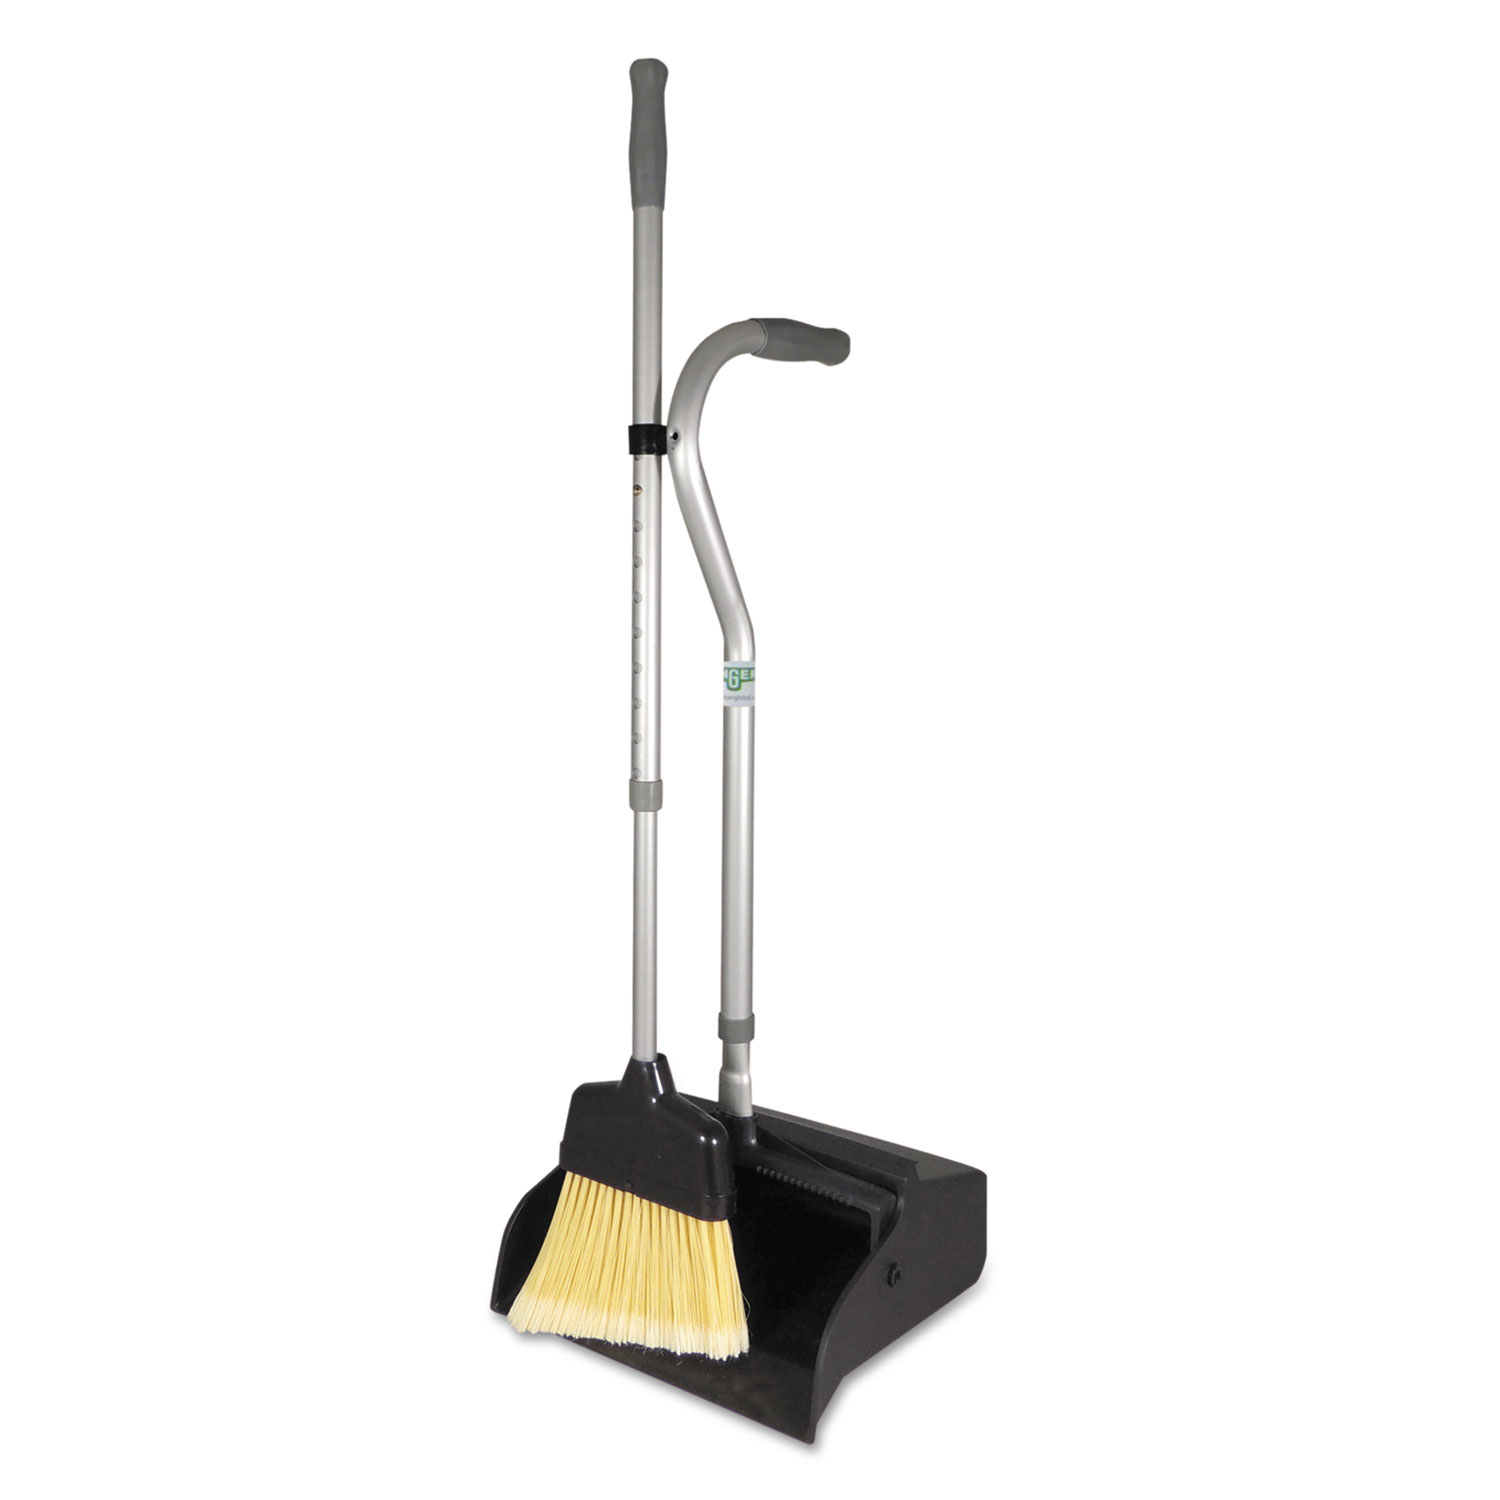  Unger EDTBG Telescopic Ergo Dust Pan with Broom, 12 Wide, 45 High, Metal, Gray/Silver (UNGEDTBG) 